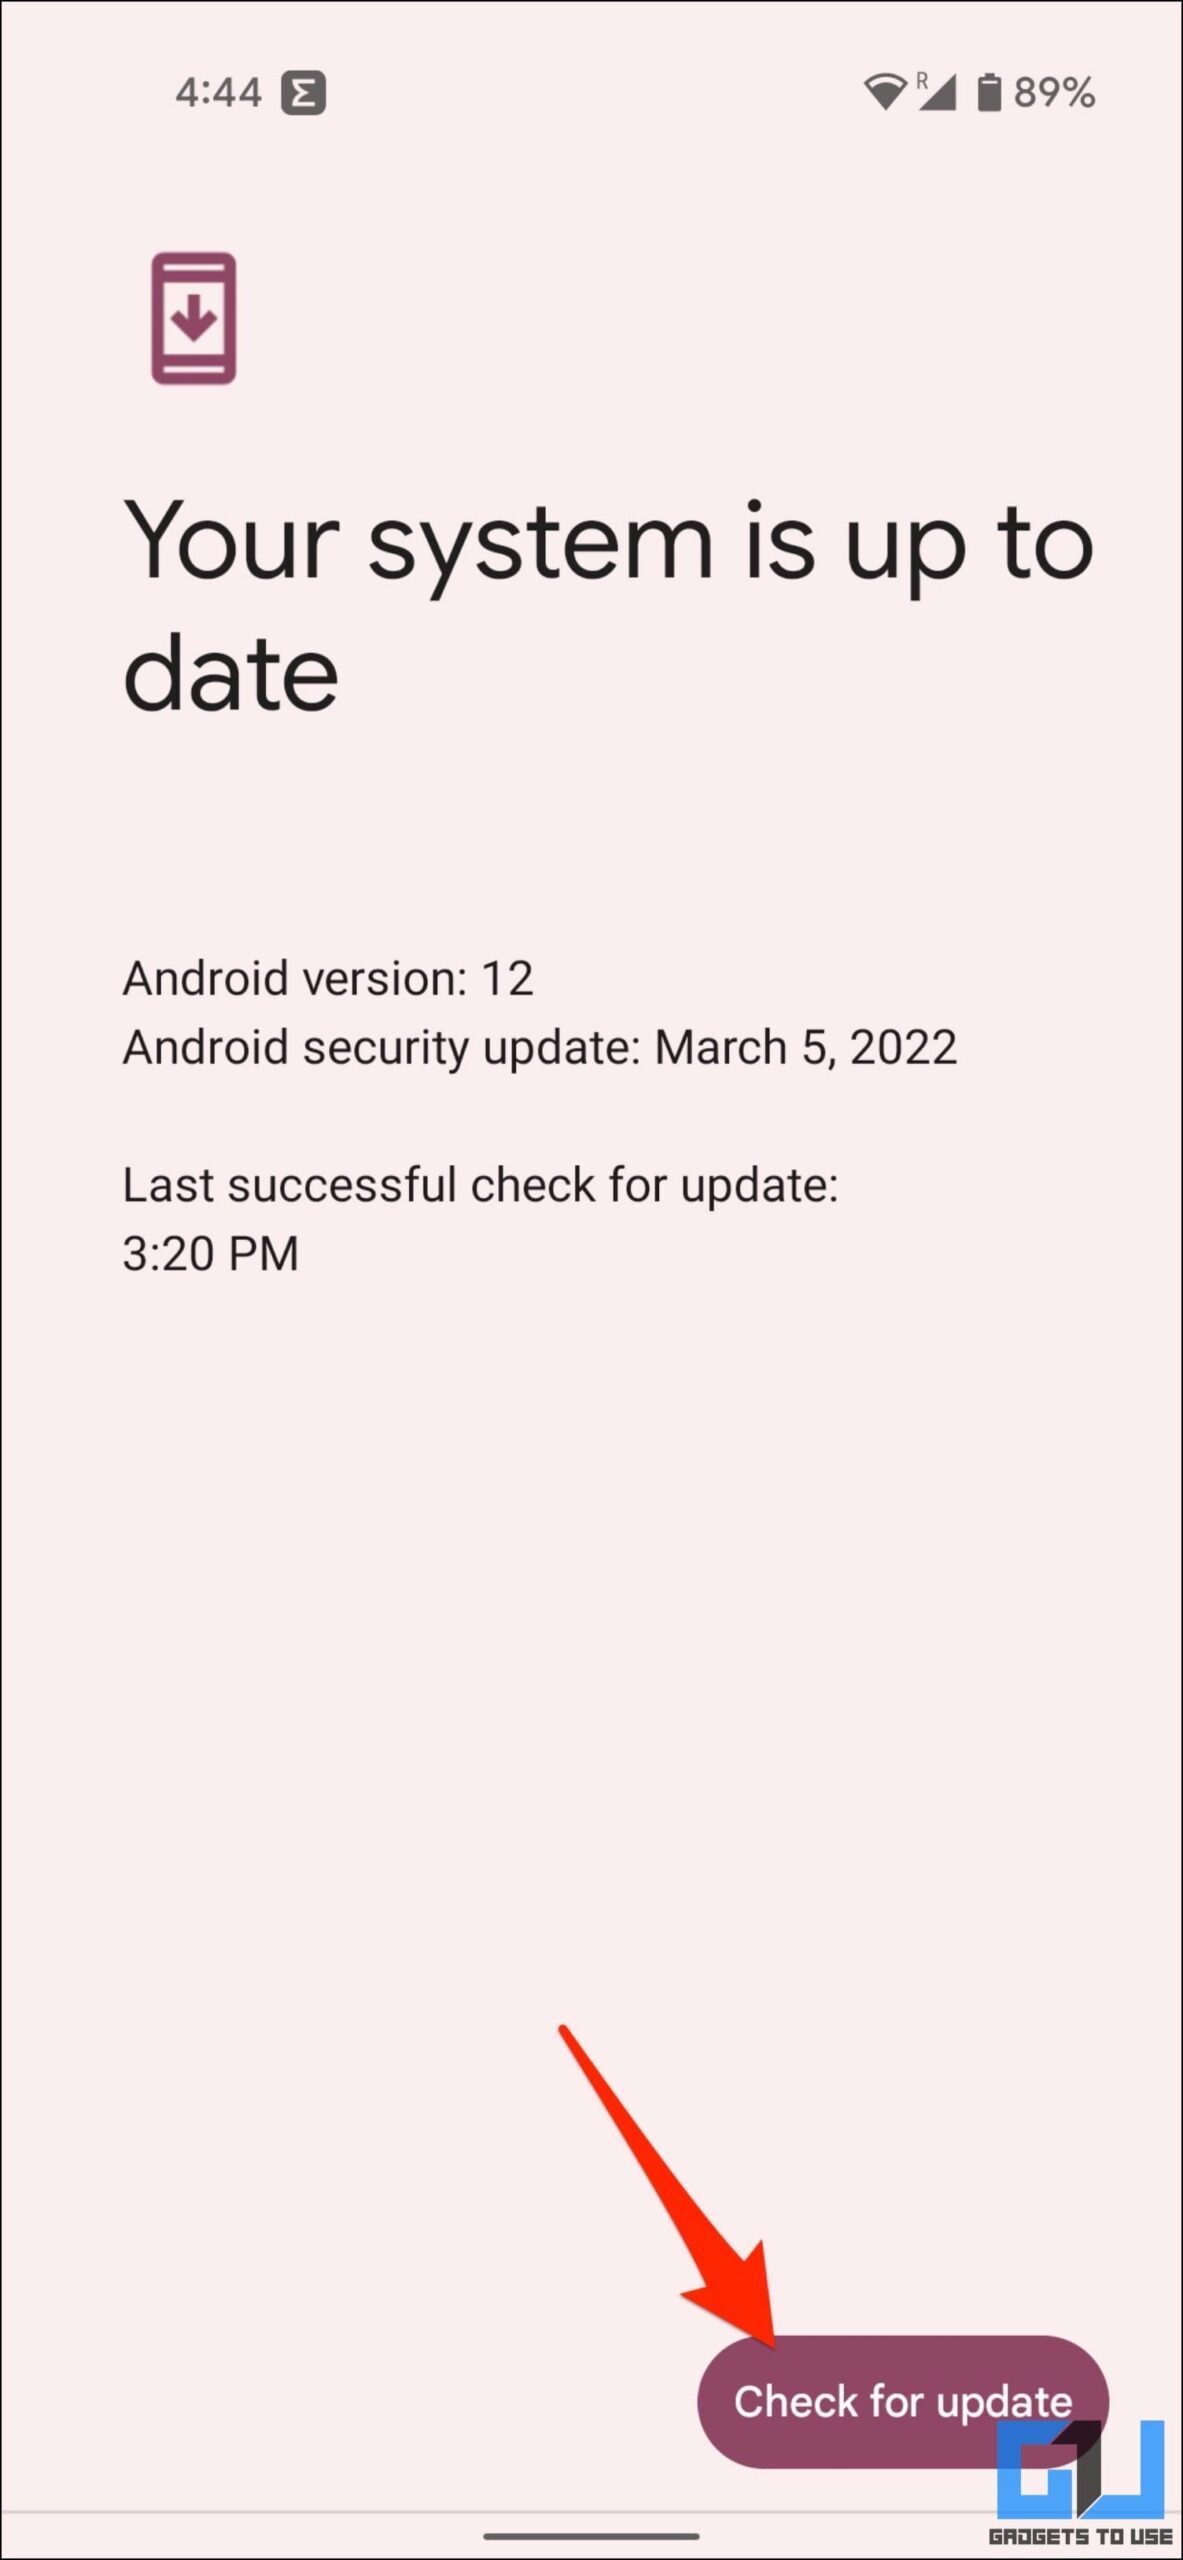 Fix Old Android Phone by Software Update